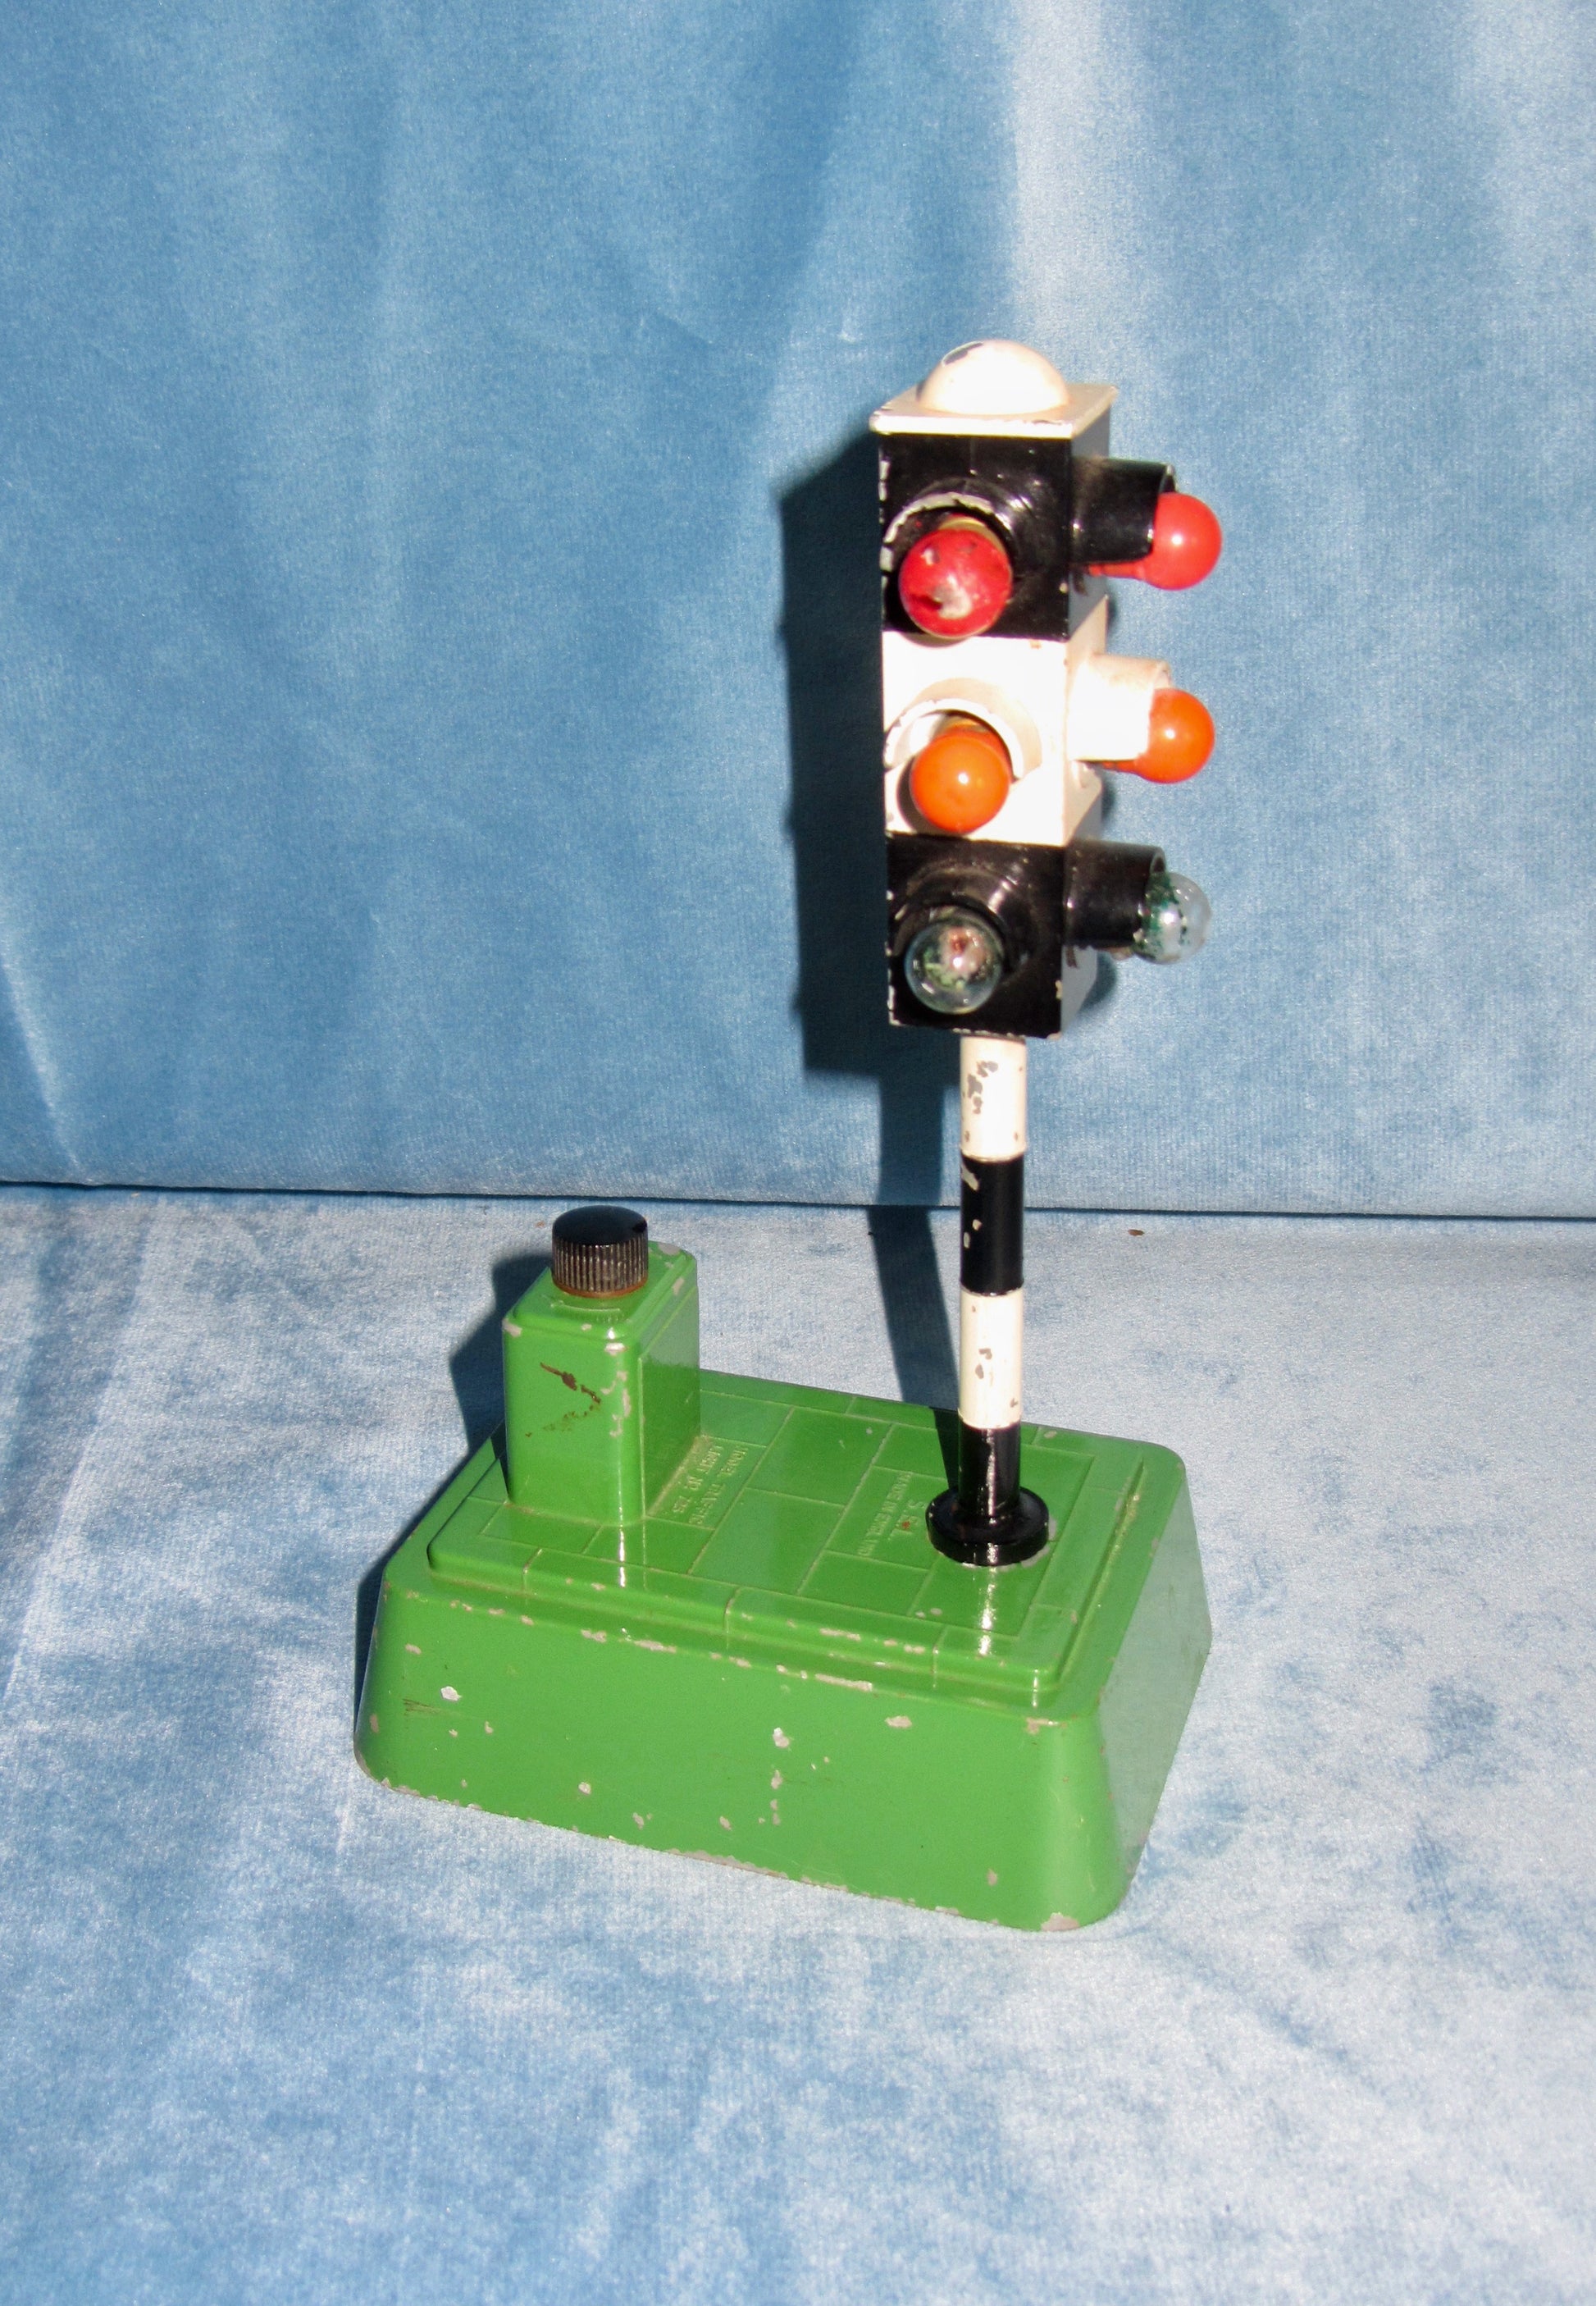 1950s British SEL Metal Battery Operated Traffic Light Toy Model 725